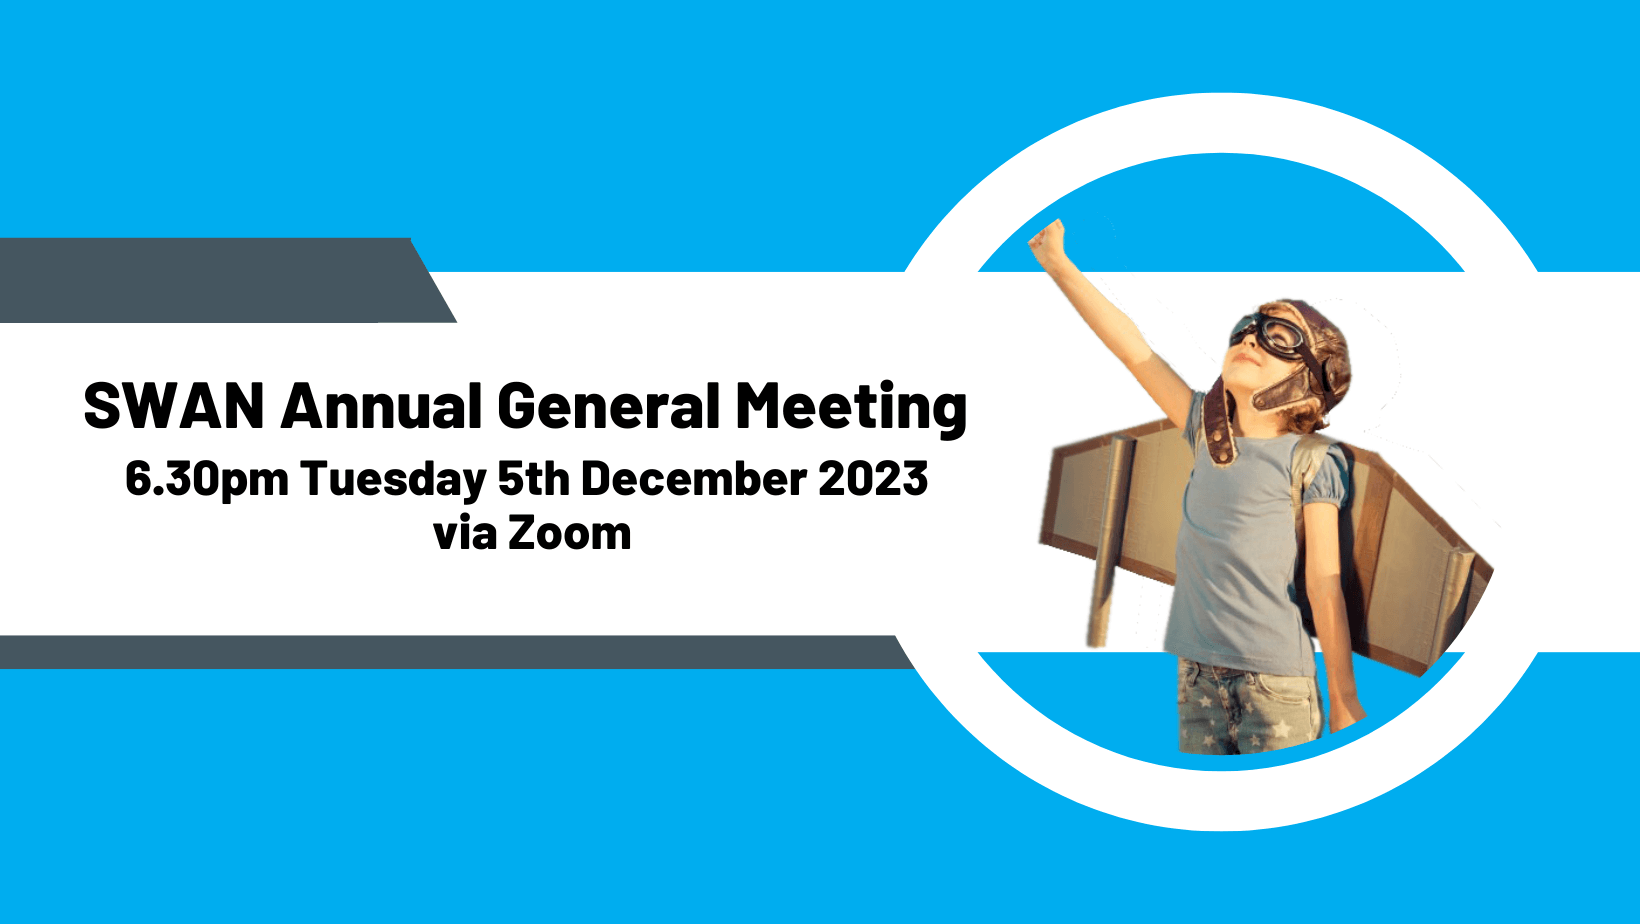 On a blue background is a white box with black text reading 'SWAN Annual General Meeting Tuesday 5th December 2023. Beside that is an image of a child wearing cardboard wings and thrusting their fist to the sky.